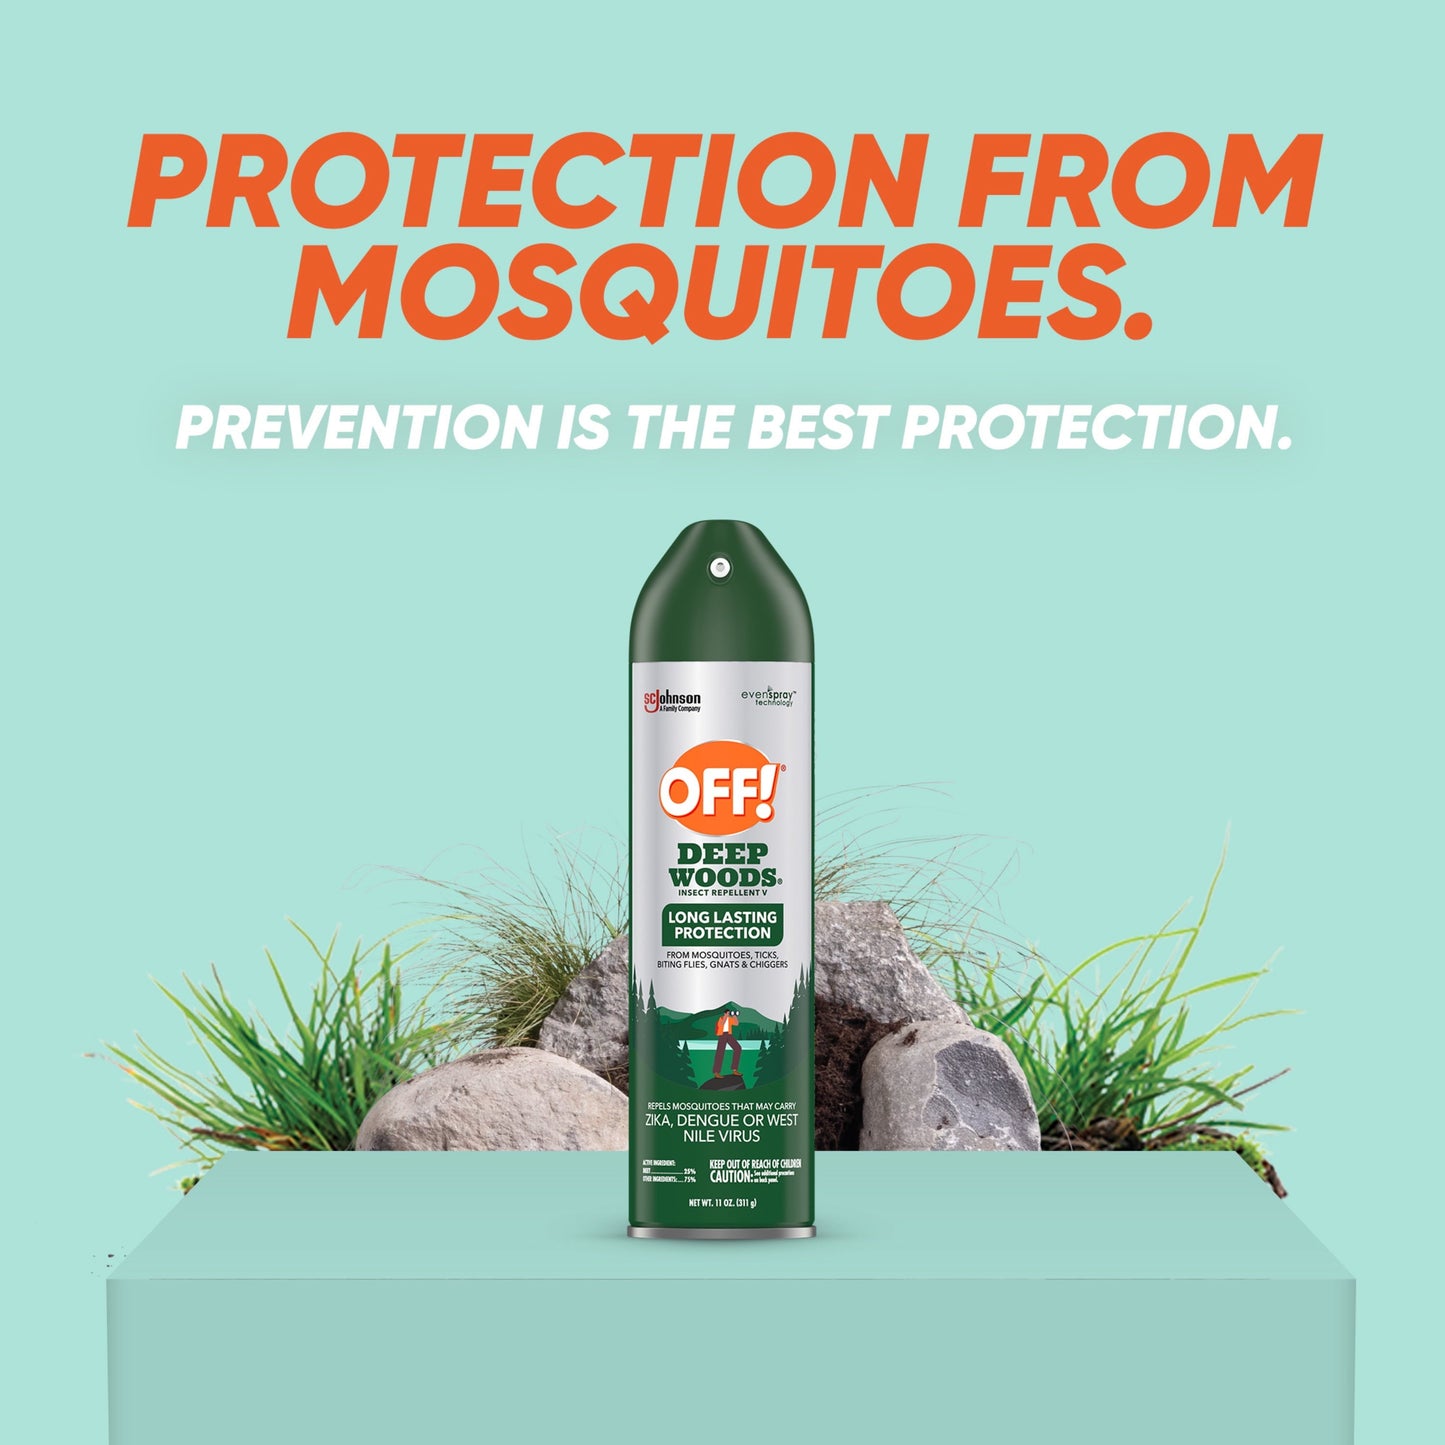 OFF! Deep Woods Insect Repellent V, Up to 8 Hours of Mosquito Protection with DEET, 11 oz